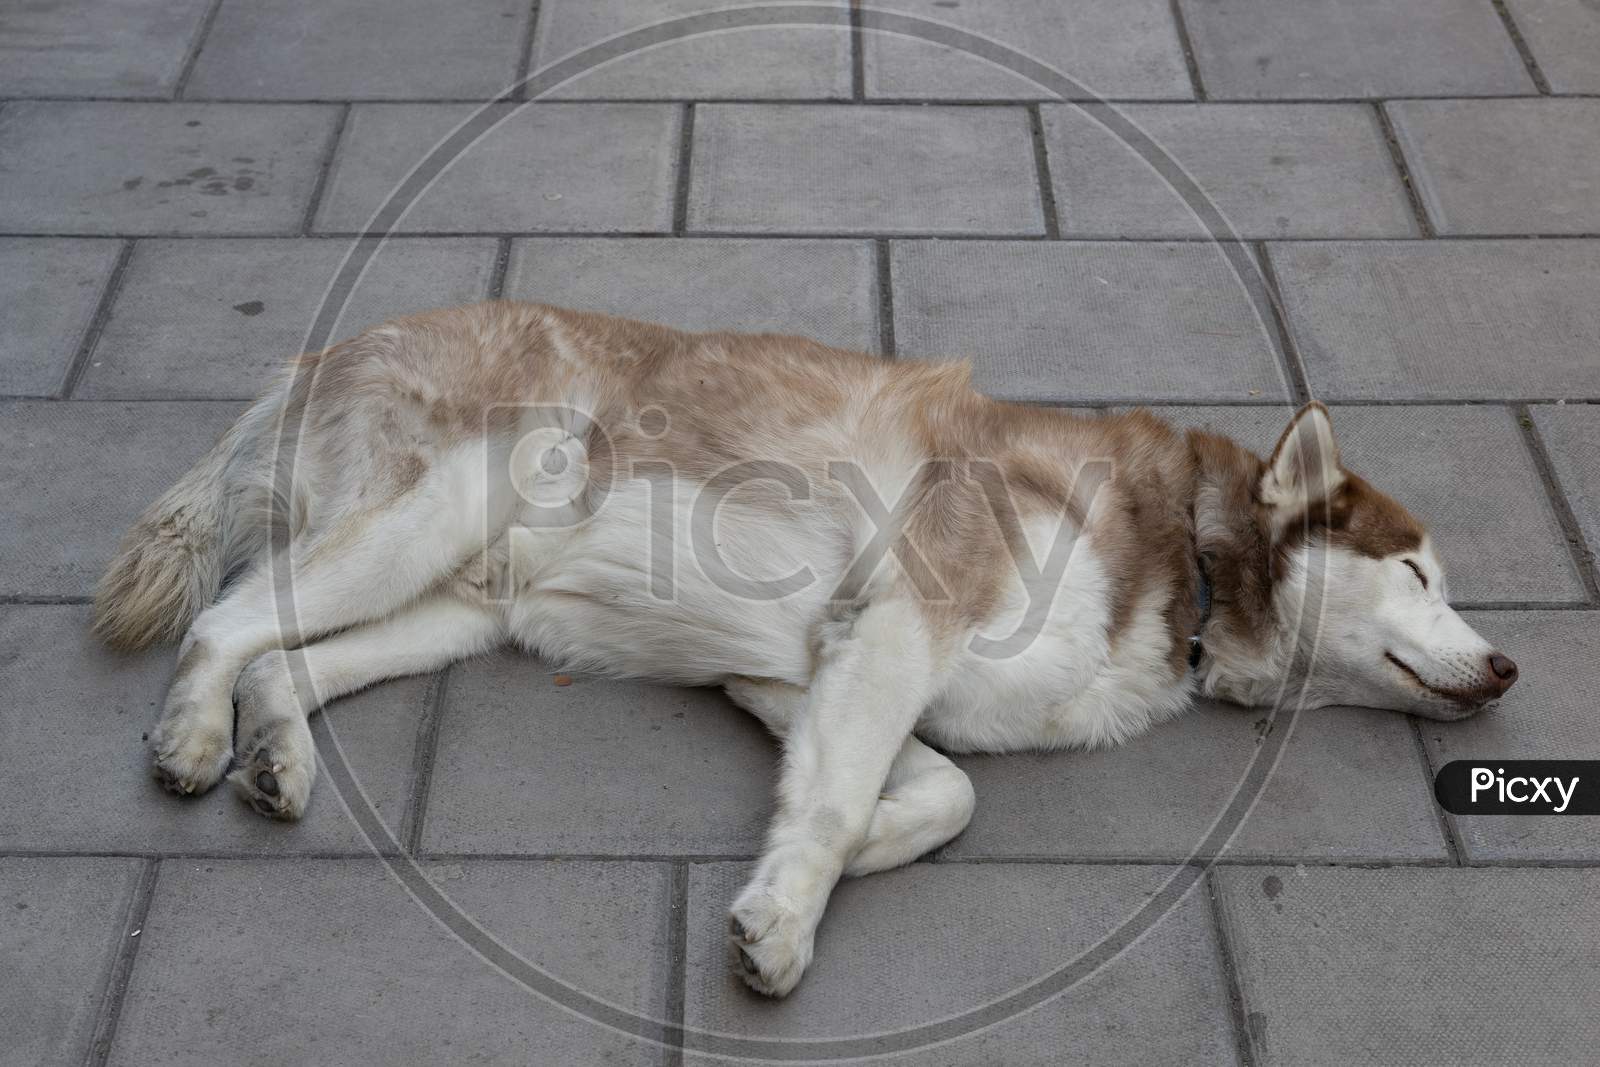 Bristol, Uk - May 14 : Dog Asleep On The Pavement Outside The Grand Hotel In Bristol On May 14, 2019